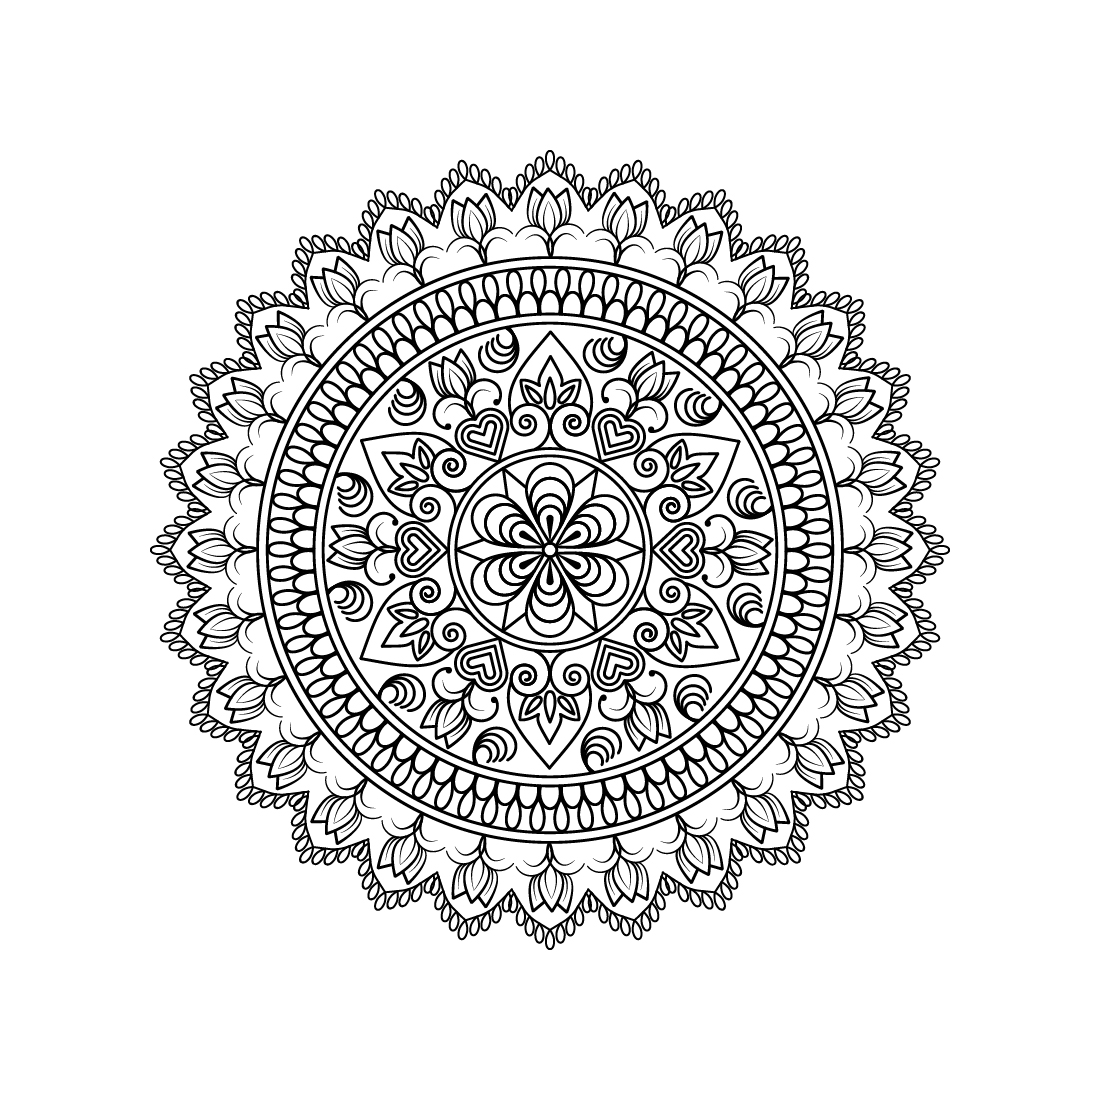 Mandala Coloring Book For Adults: ( Black Background ) Coloring Pages For  Meditation And Happiness Adult Coloring Book Featuring Calming Mandalas  desi (Paperback)